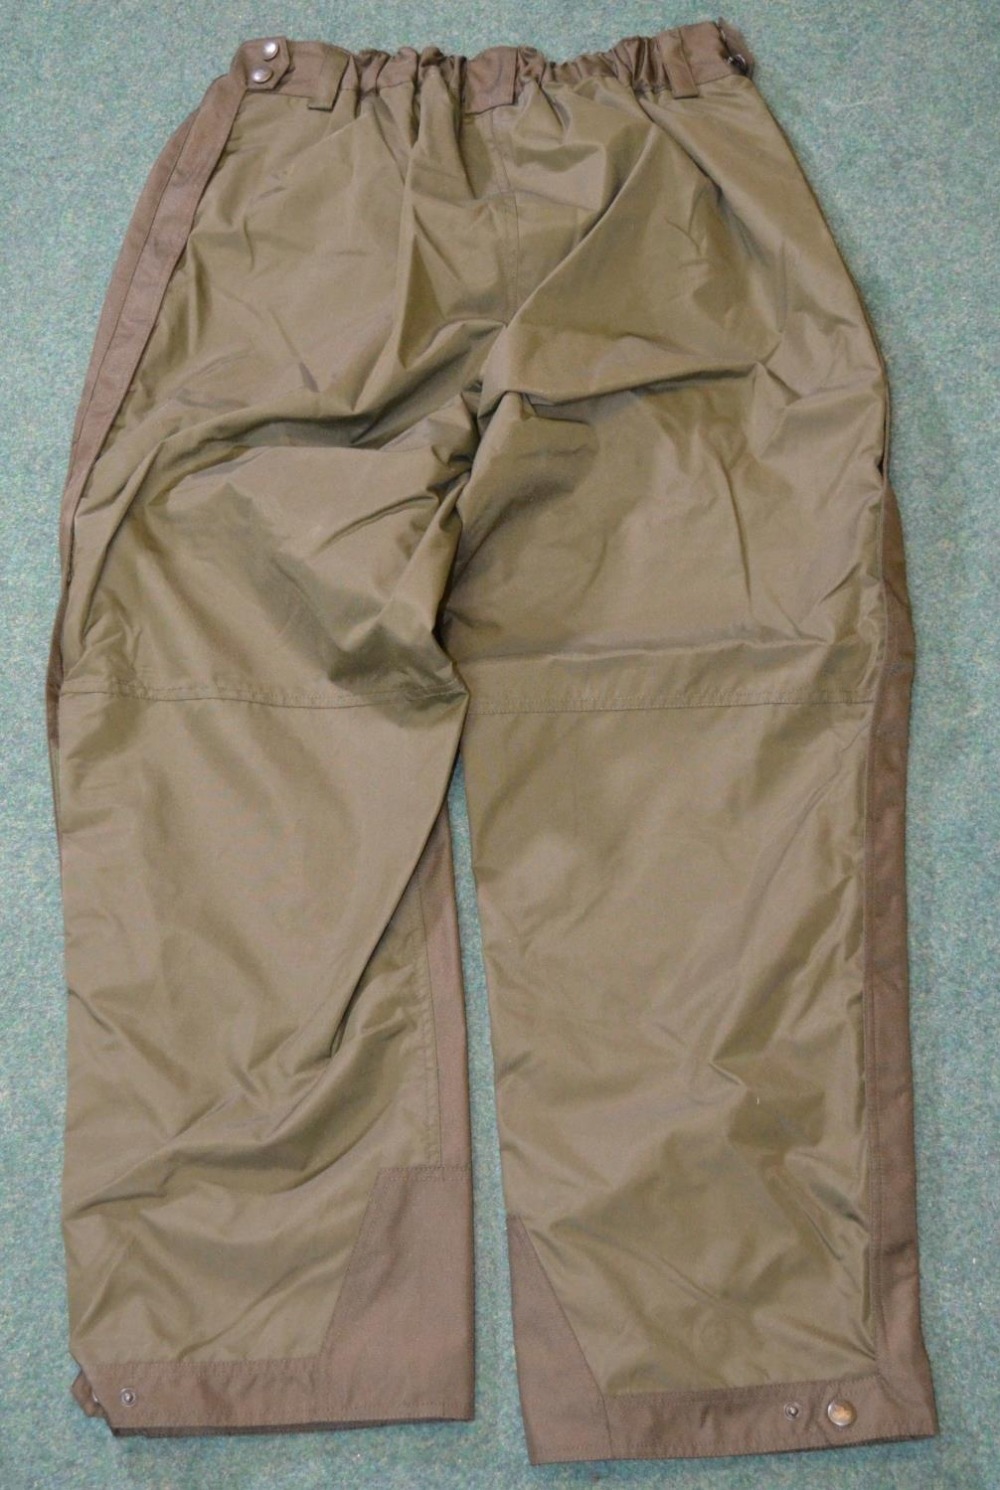 Pair of Bonart olive green overtrousers, size medium, pair of Harkila braces, pair of Alan Paine - Image 2 of 2